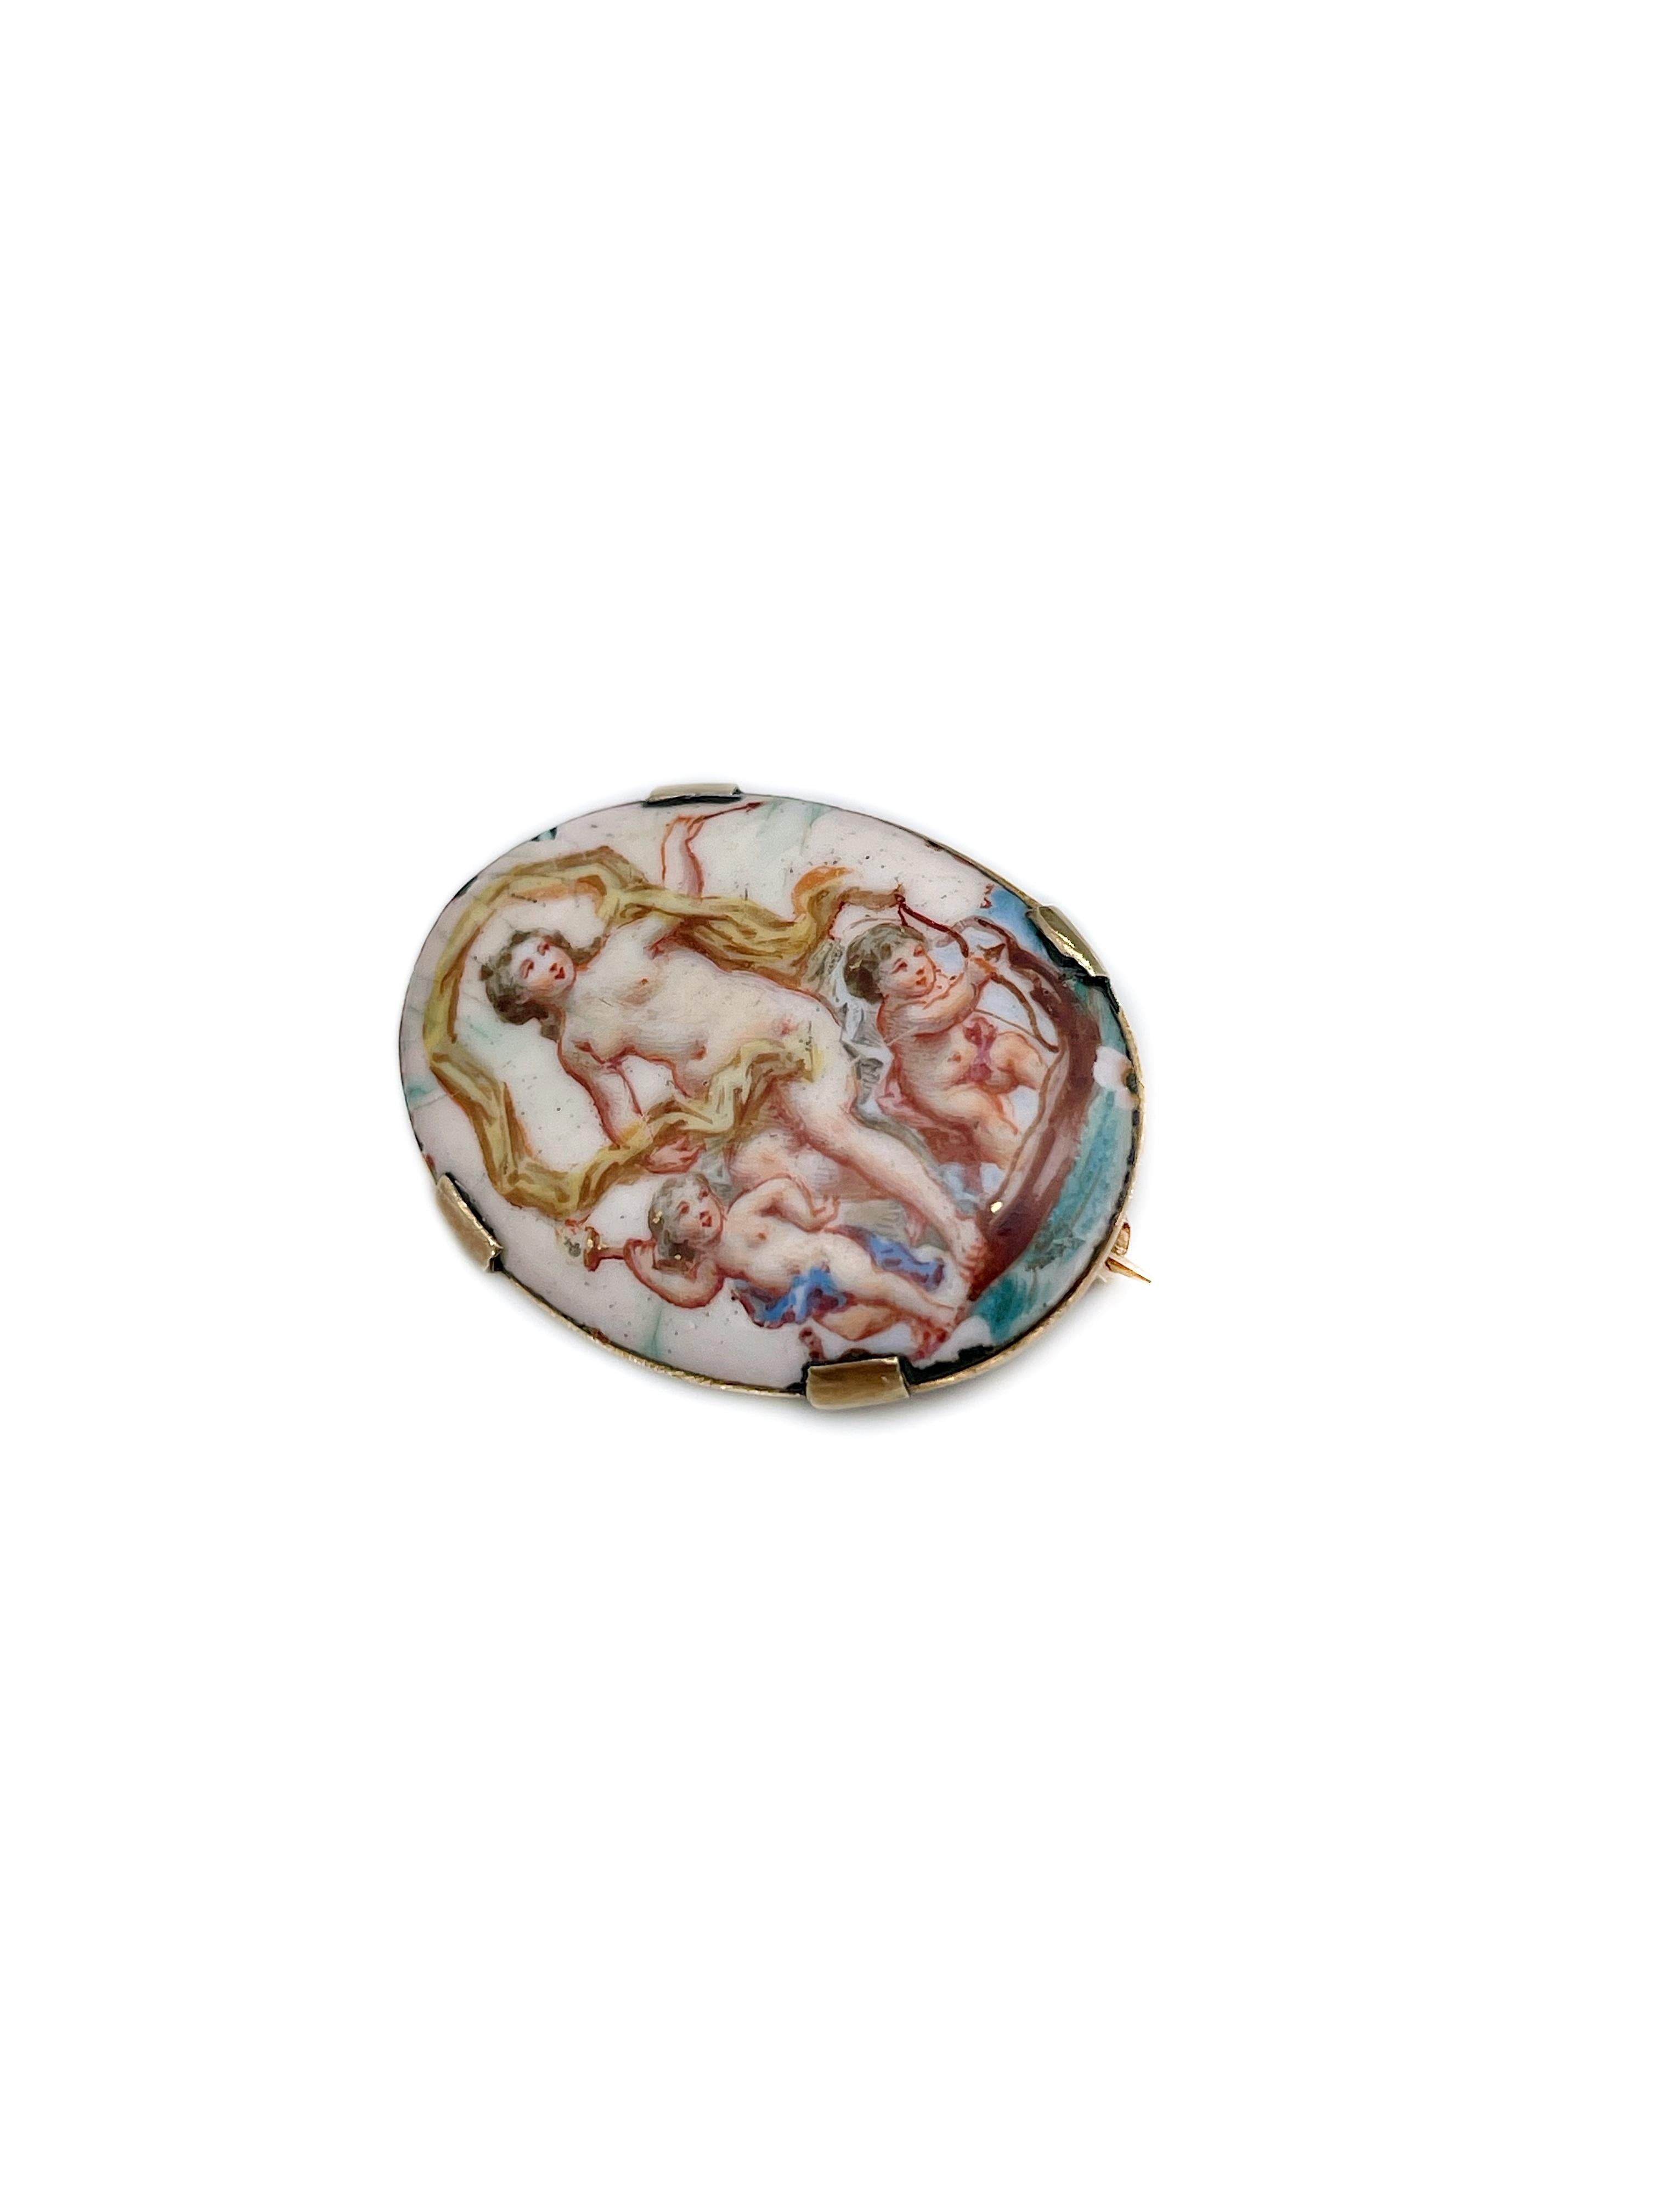 Victorian 18 Karat Gold Porcelain Miniature Painting Oval Small Pin Brooch In Good Condition For Sale In Vilnius, LT